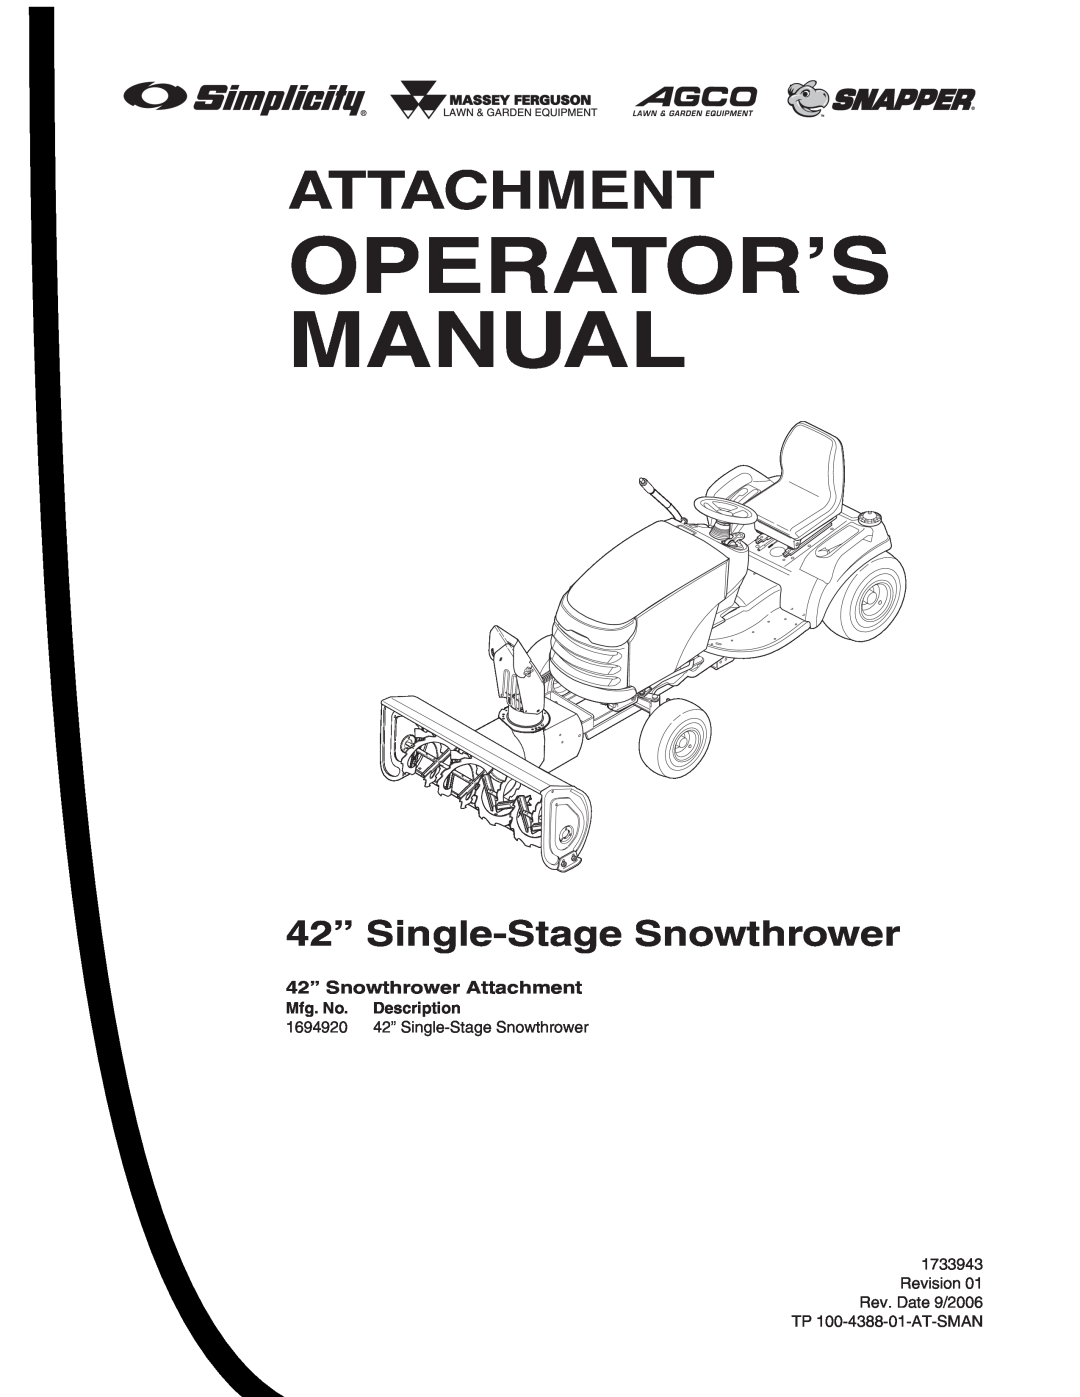 Snapper 42" Single-Stage Snowthrower manual Operator’S Manual, Attachment, 42” Single-StageSnowthrower 